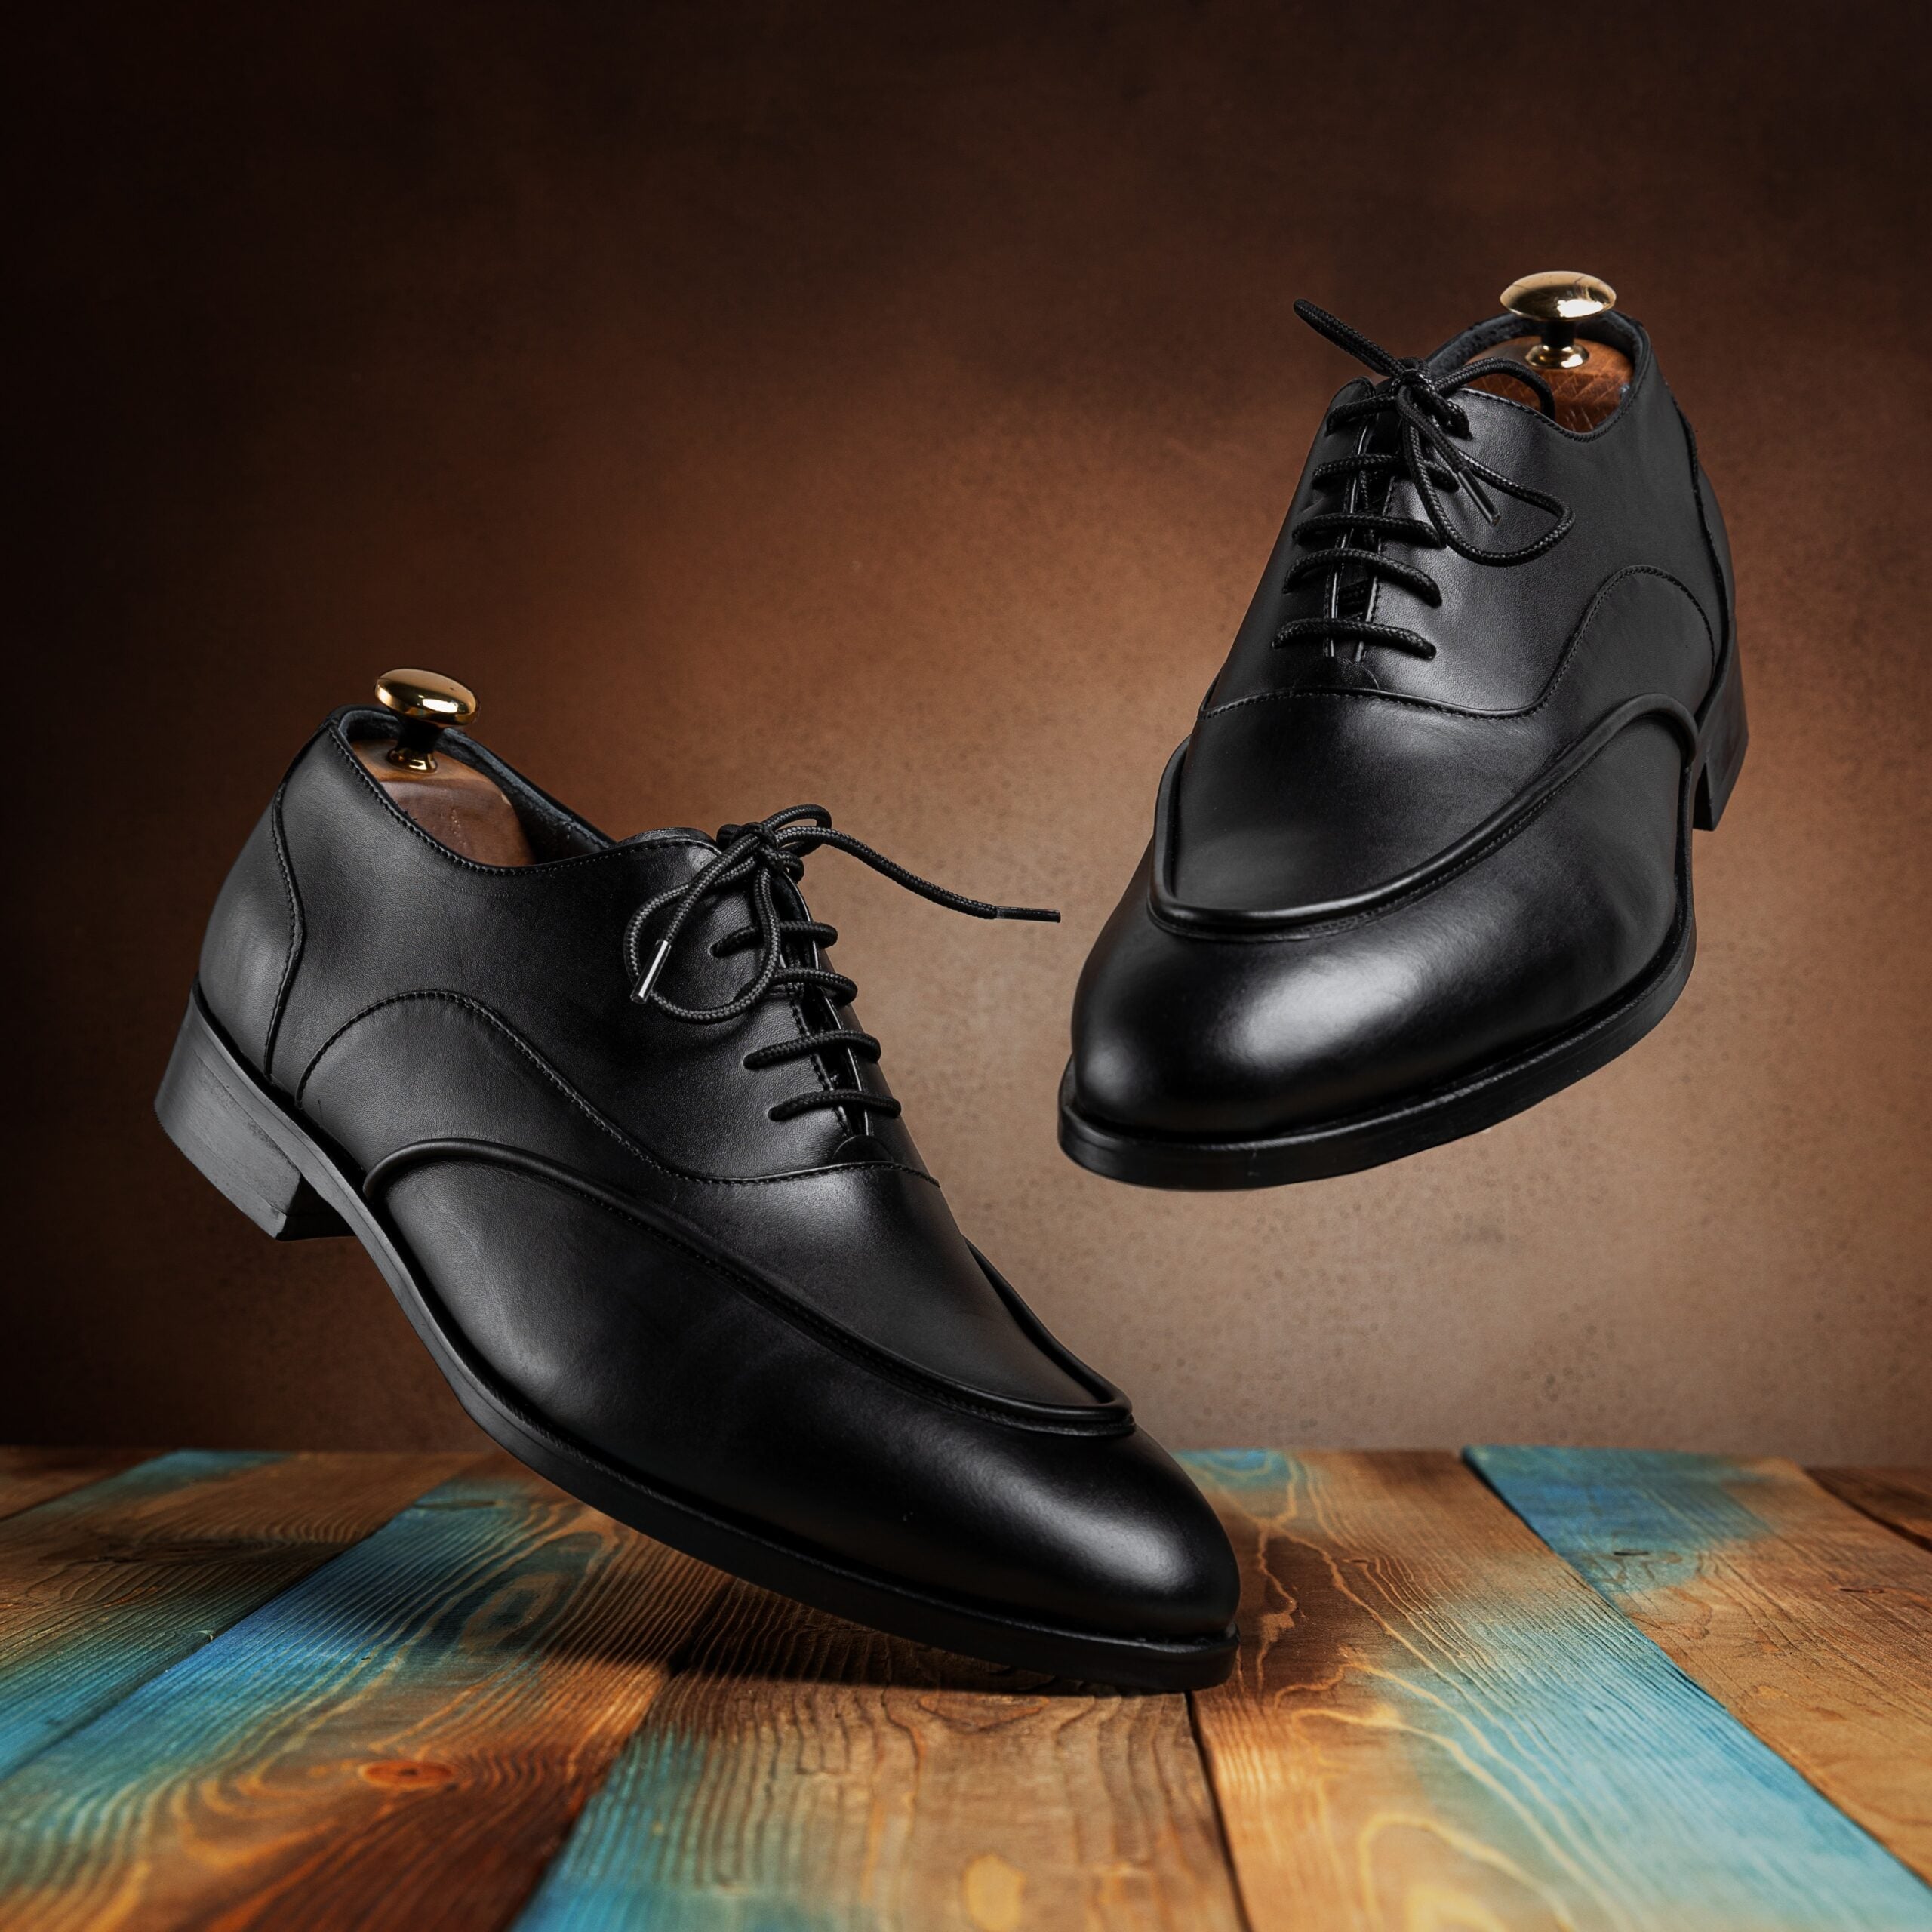 Male Shoes Cleaner With Cloth For Black Leather Polished Derby